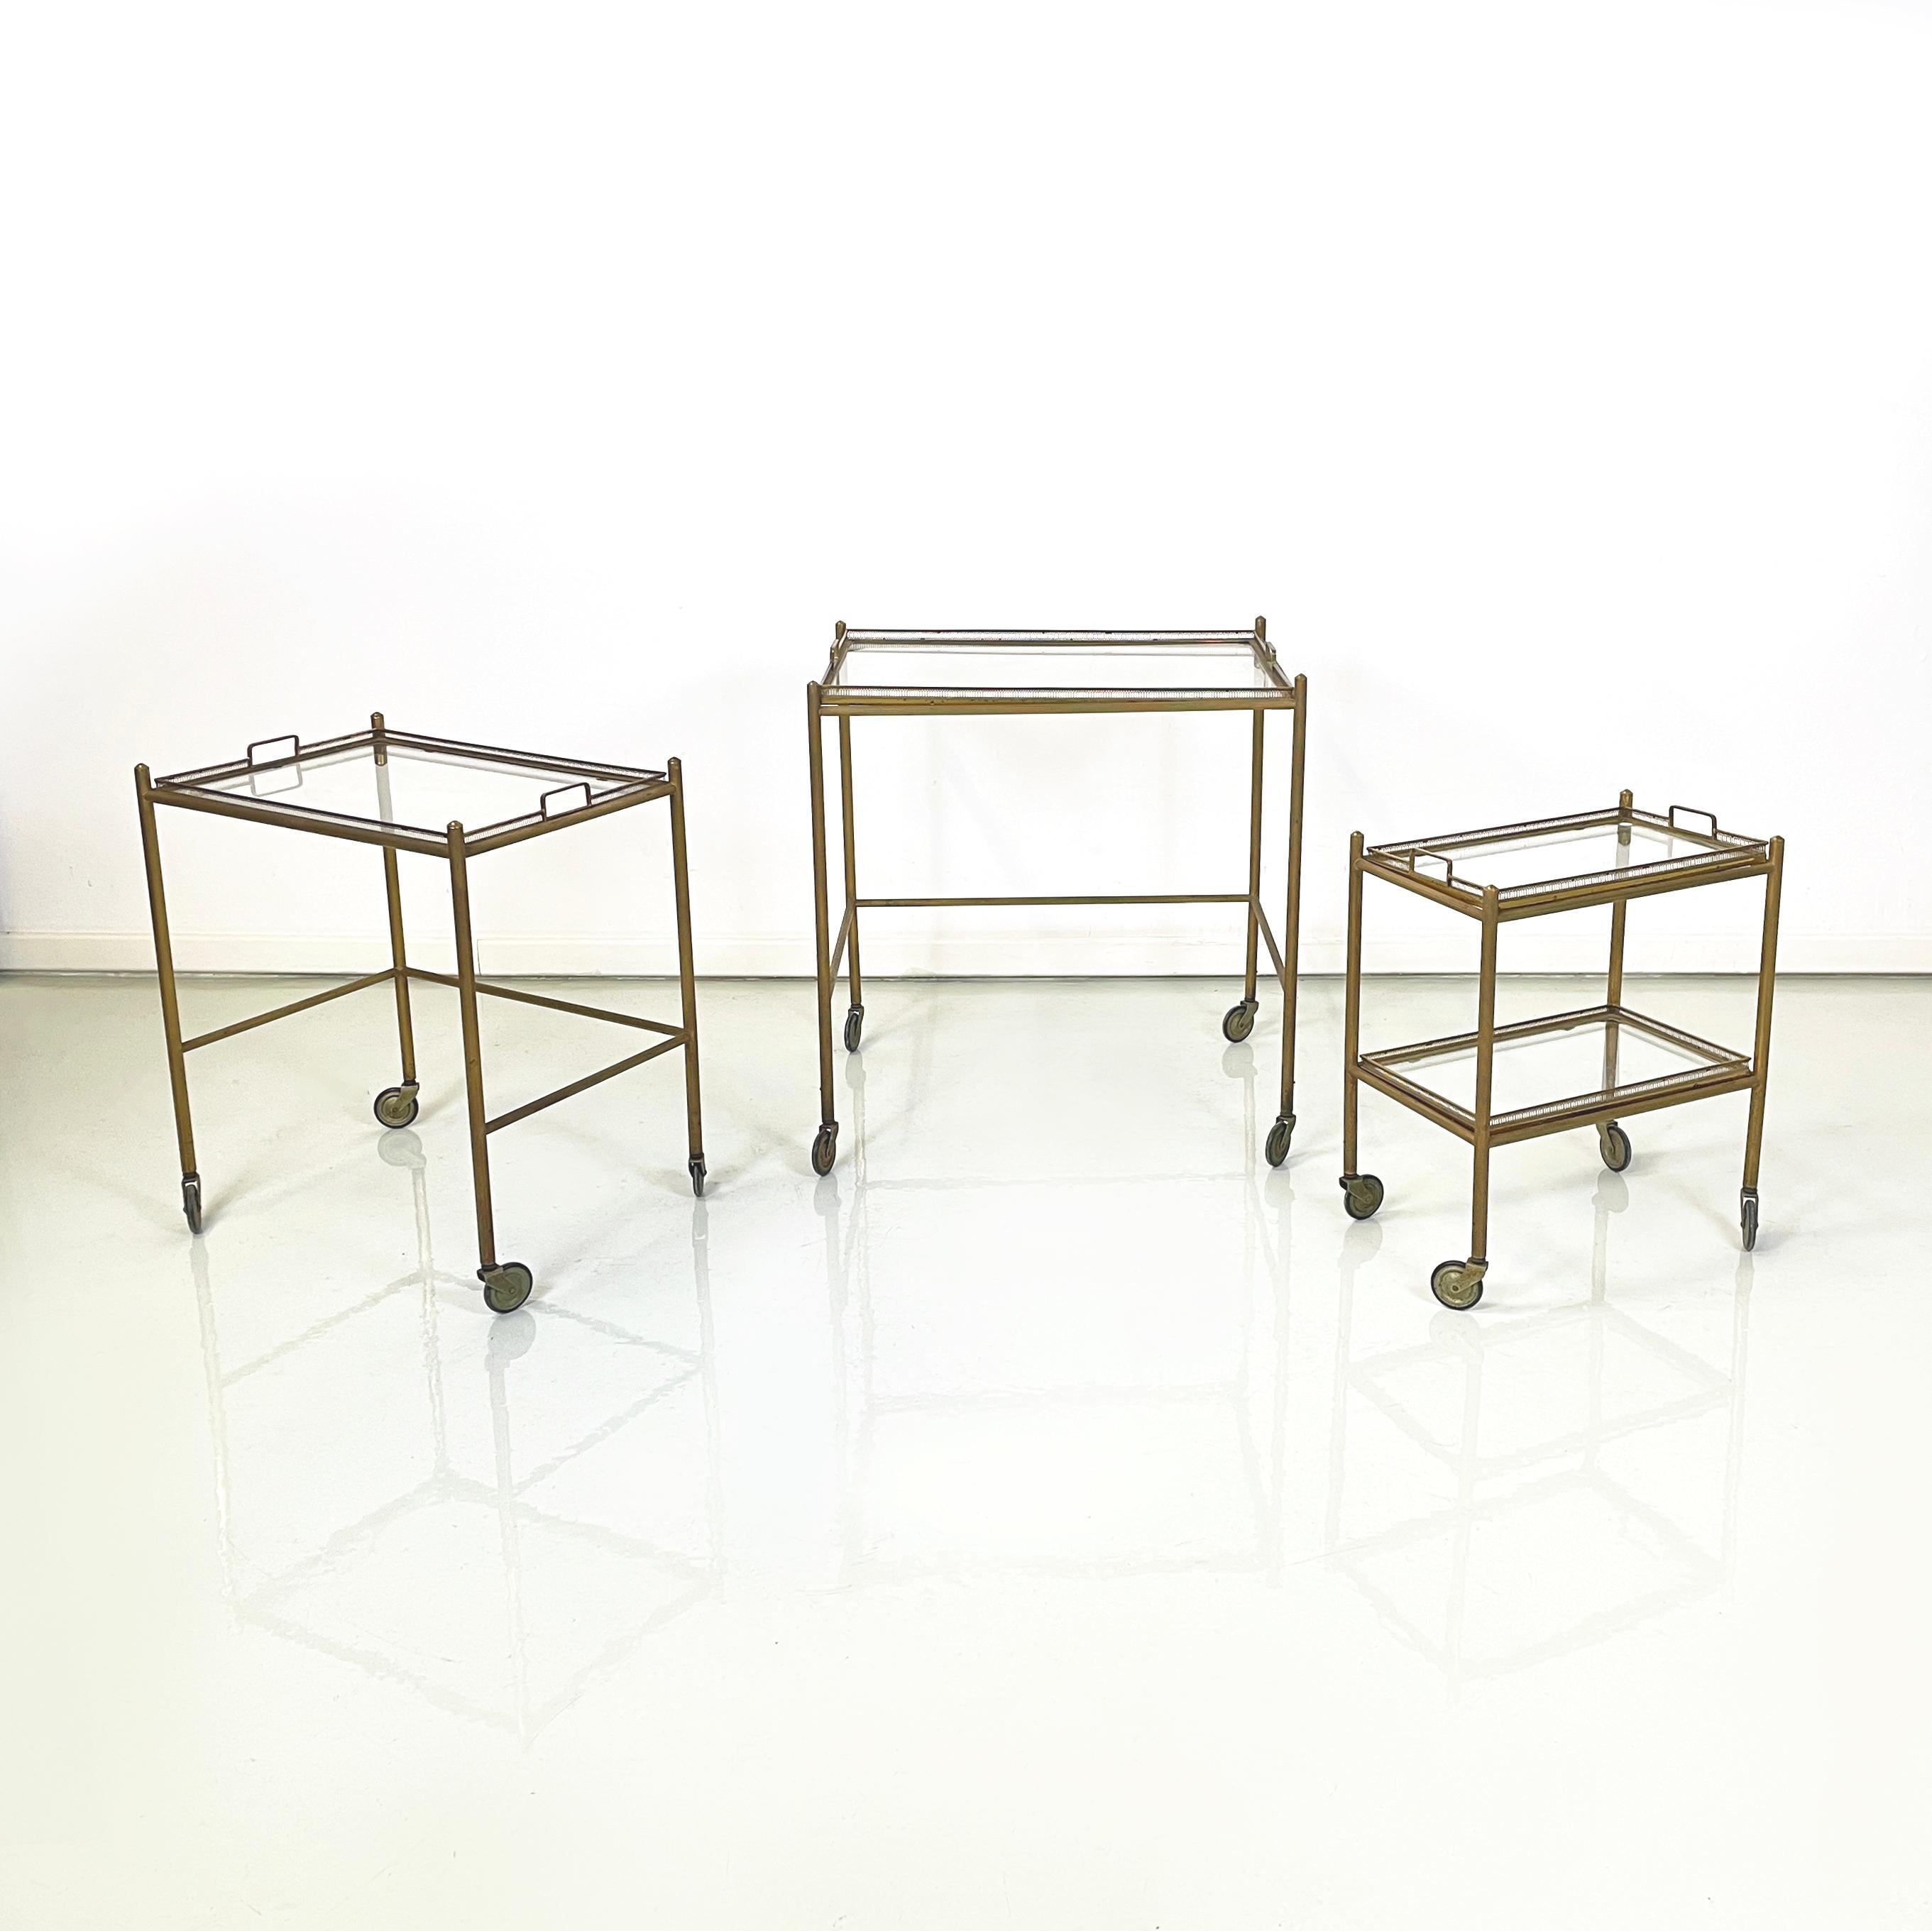 Italian mid-century modern Brass and glass carts with tray, 1960s
Set of 3 food carts with brass structure. The two larger carts have a removable tray with a finely crafted brass structure and glass top. The smaller cart has two shelves with a